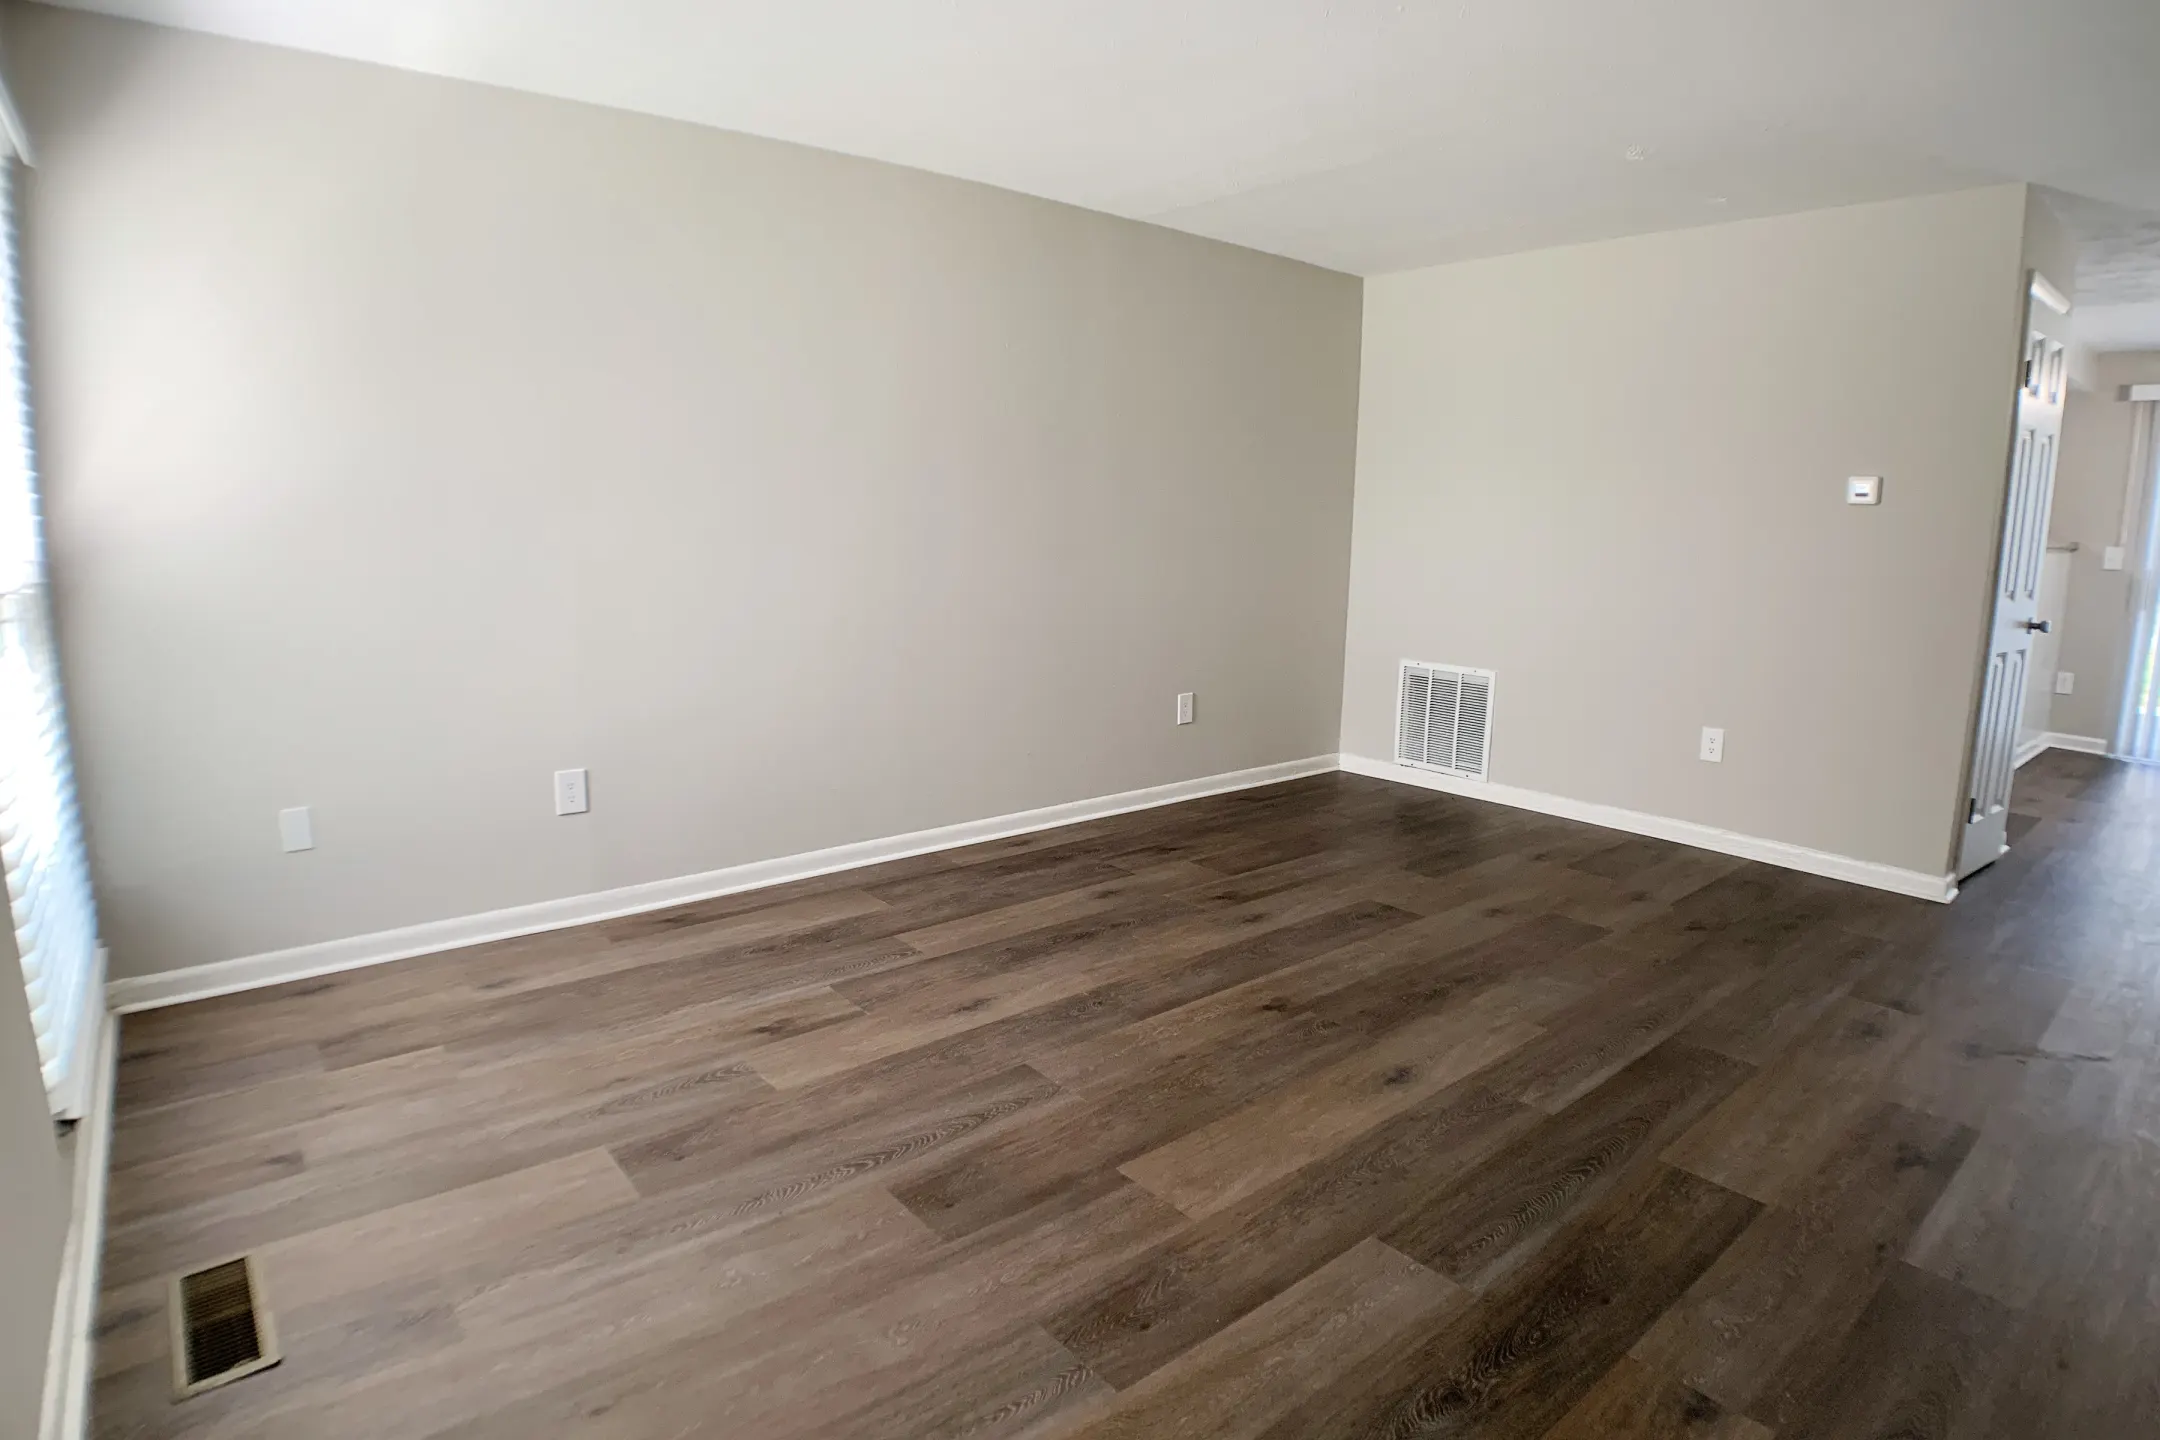 Living Room - Miamisburg By The Mall - Miamisburg, OH